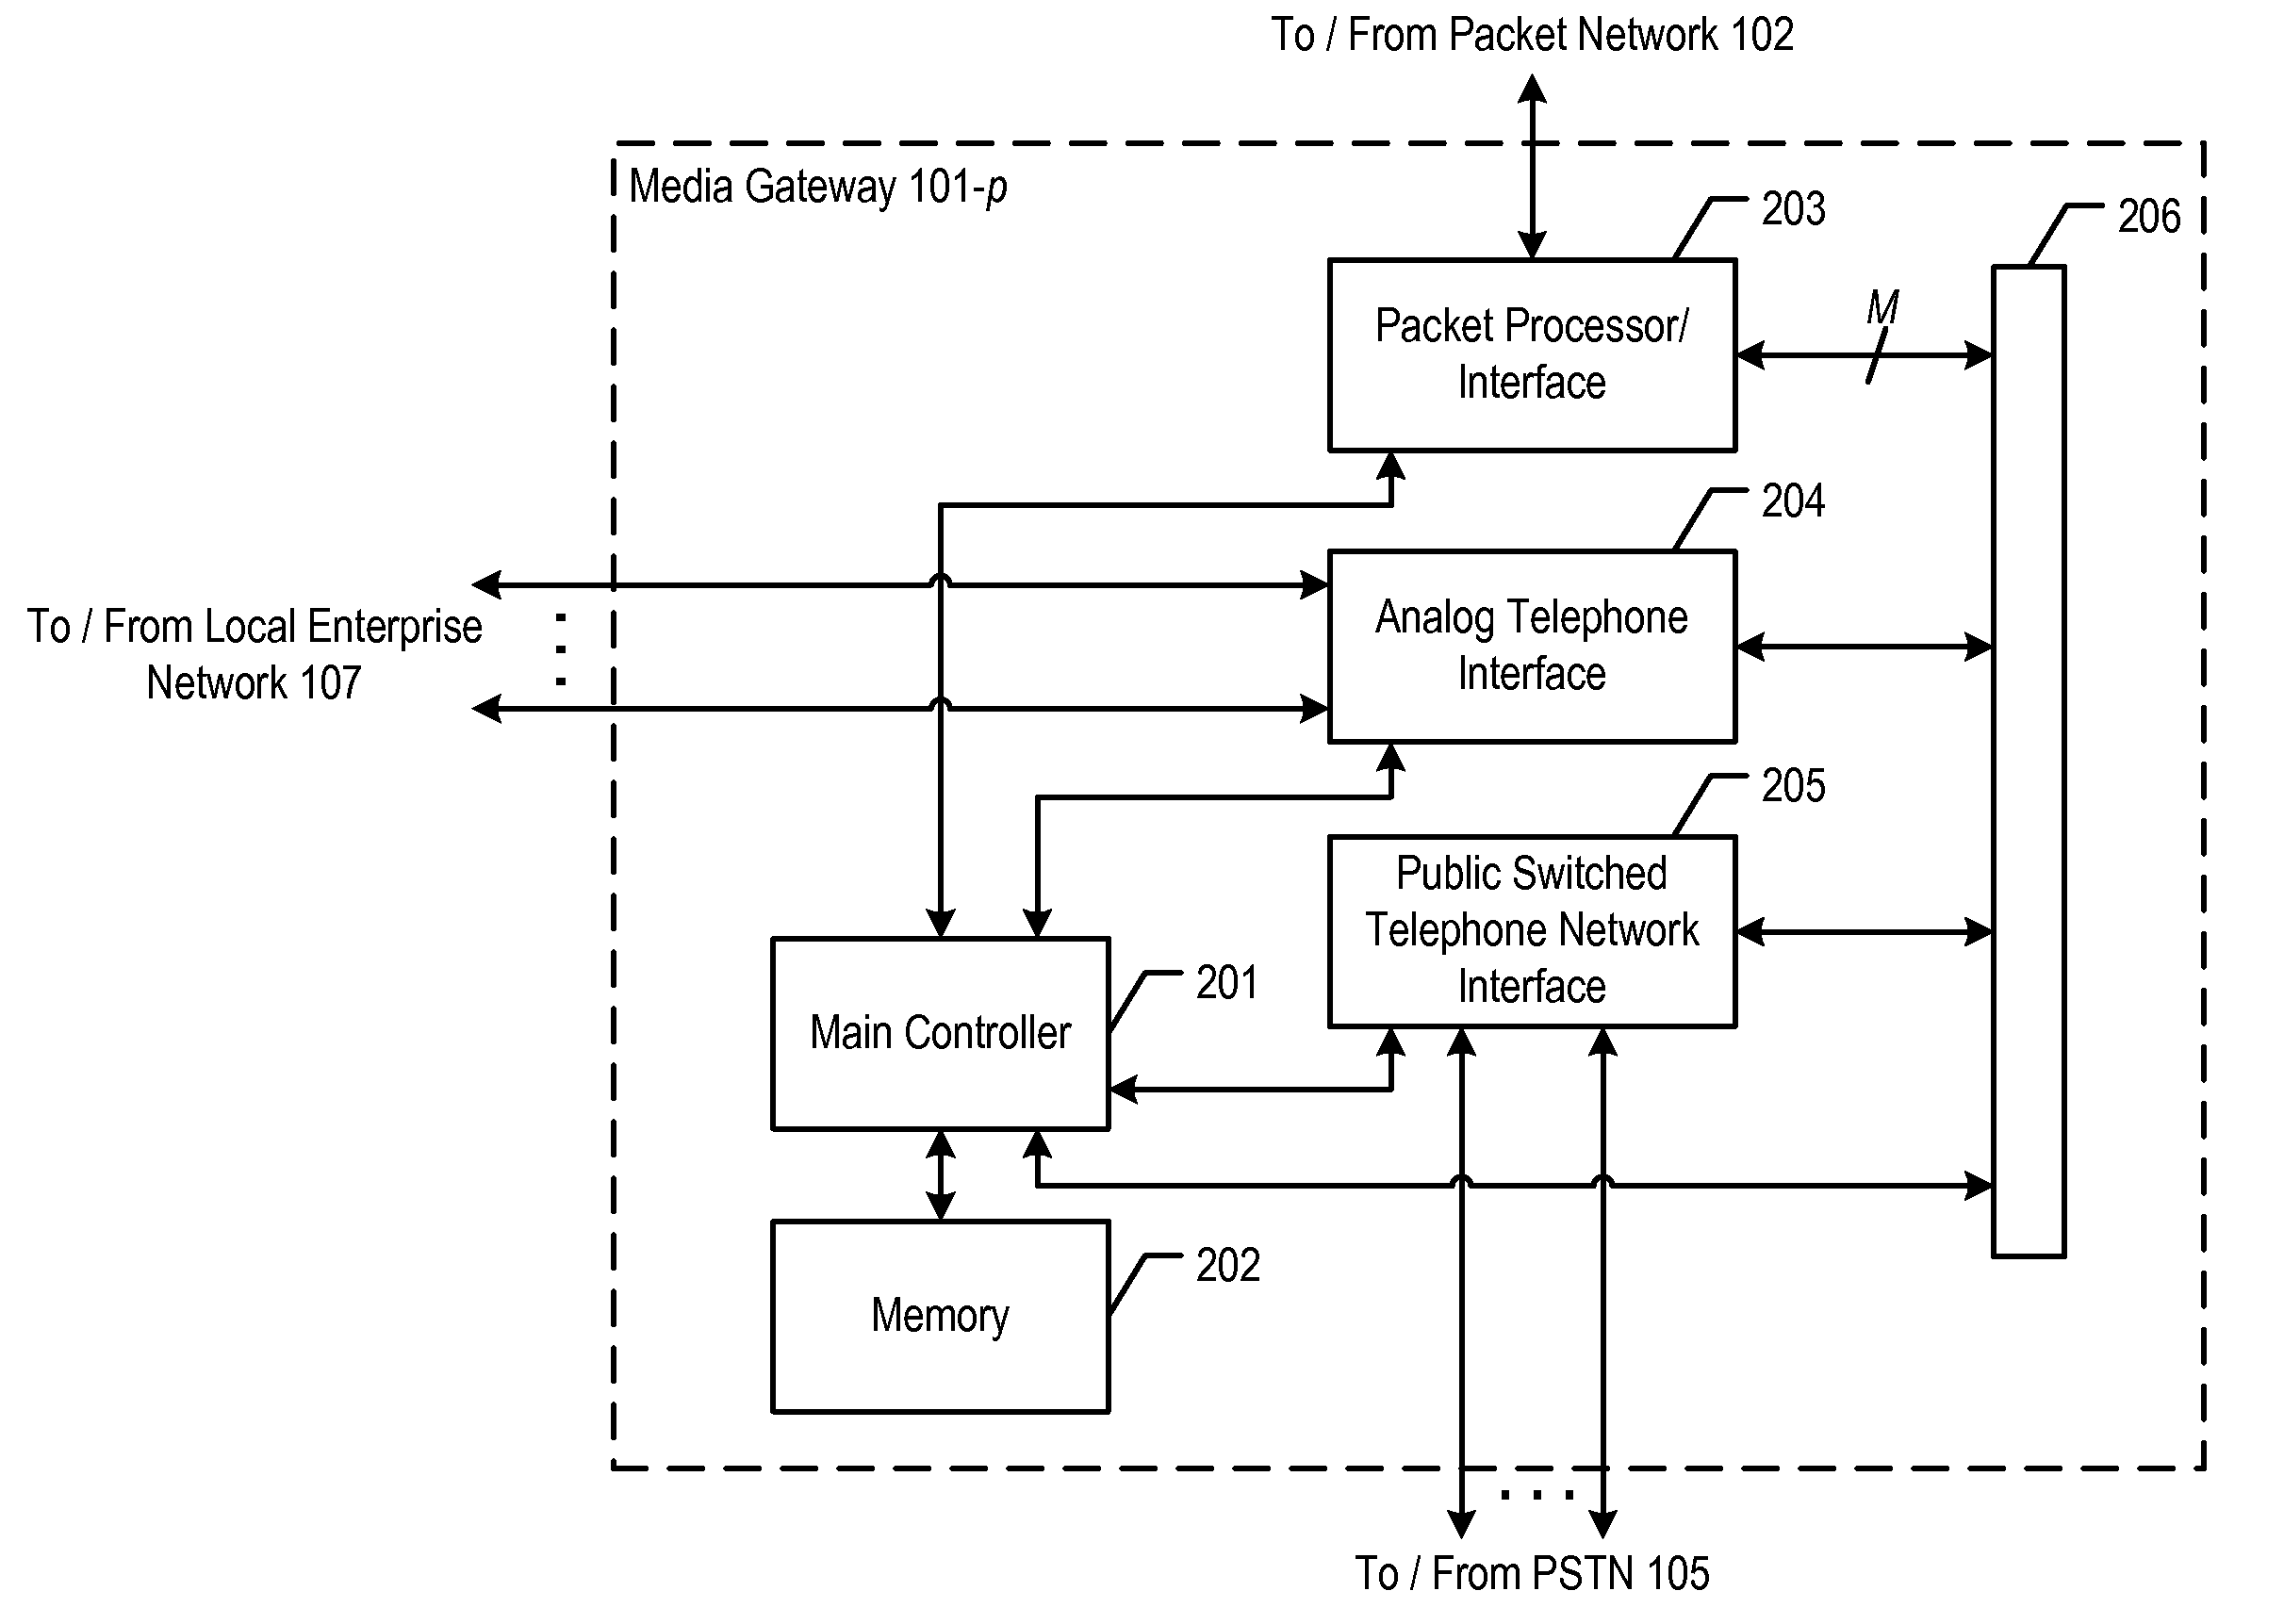 Accelerated Removal from Service of a Signal Processor at a Media Gateway